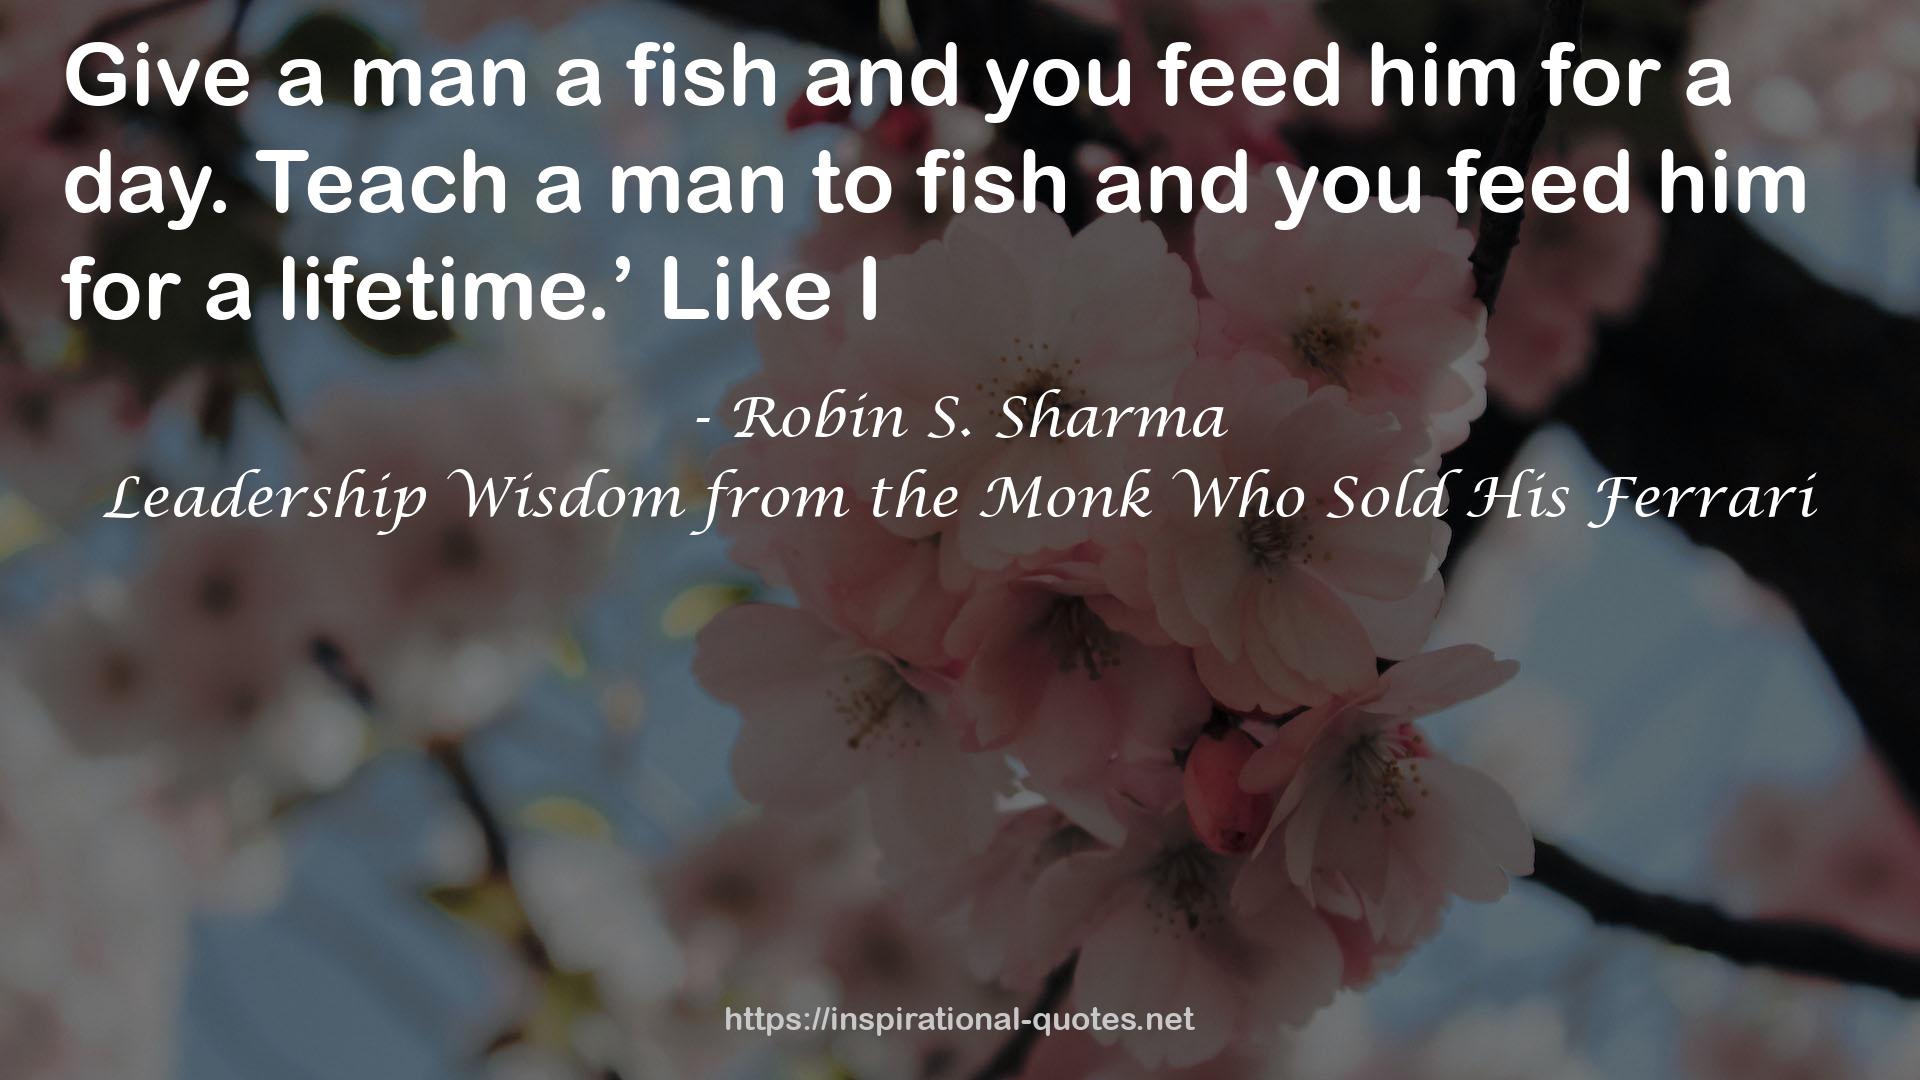 Leadership Wisdom from the Monk Who Sold His Ferrari QUOTES